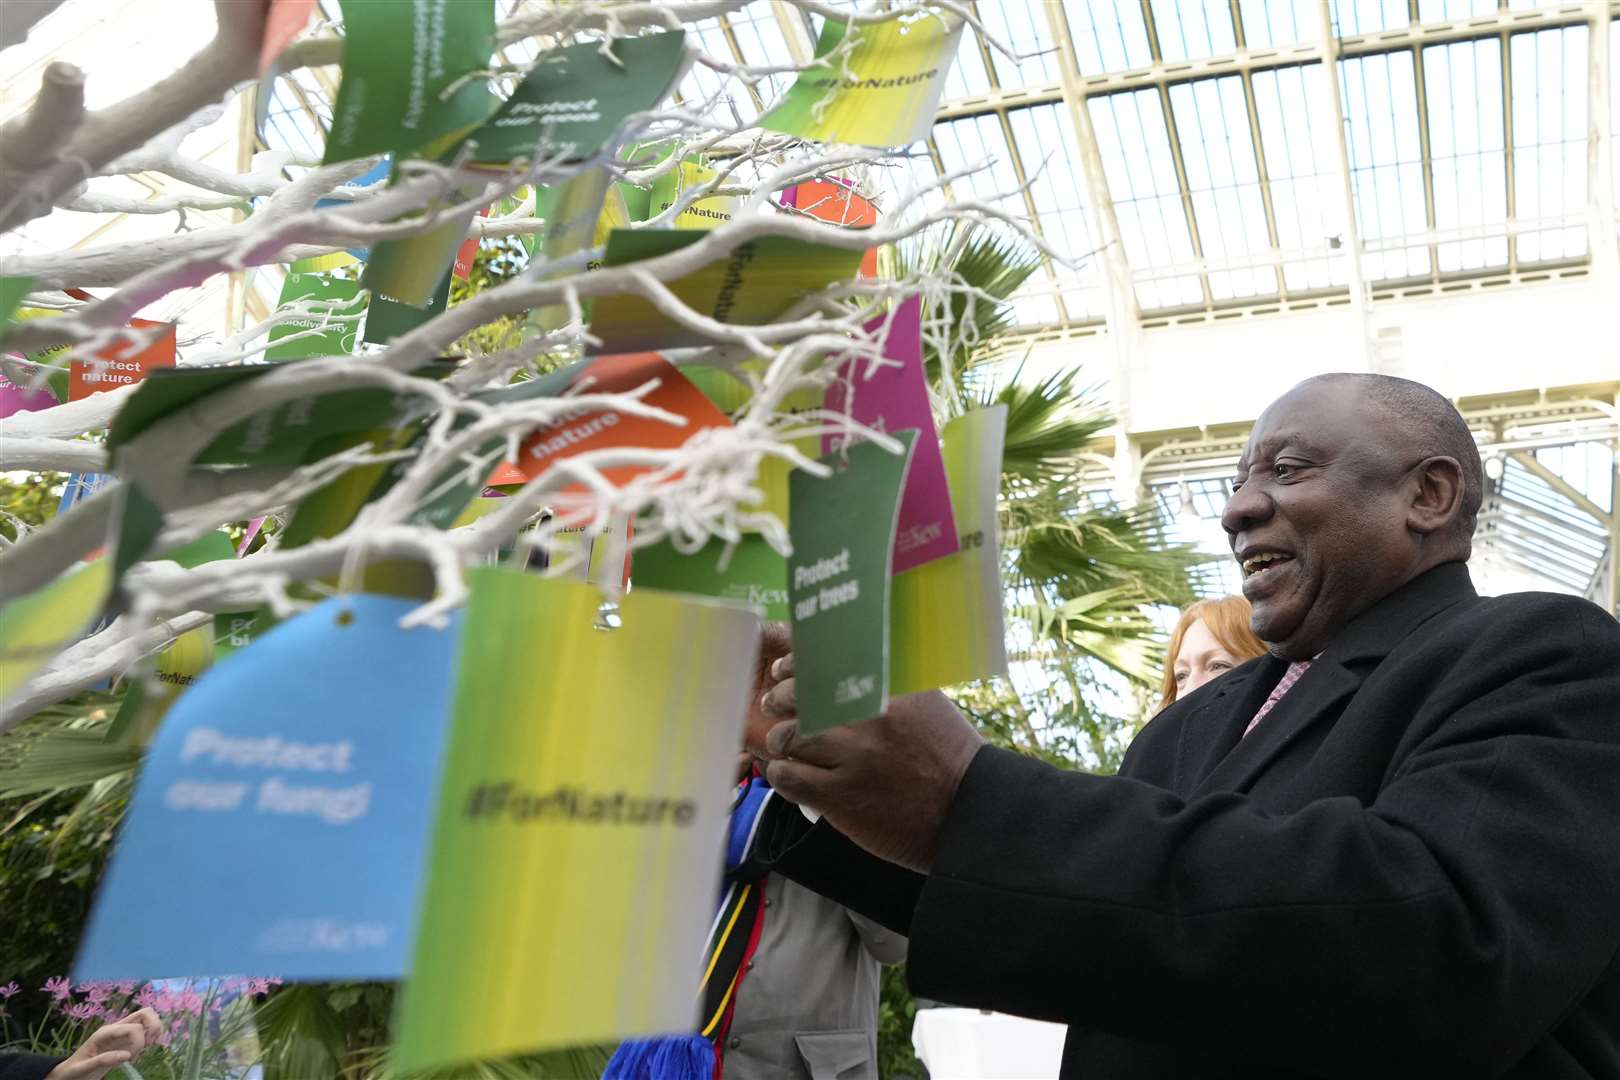 The president ties a ‘wish’ onto a Wishing Tree for Nature as he tours the Temperate House at Kew (Kirsty Wigglesworth/PA)